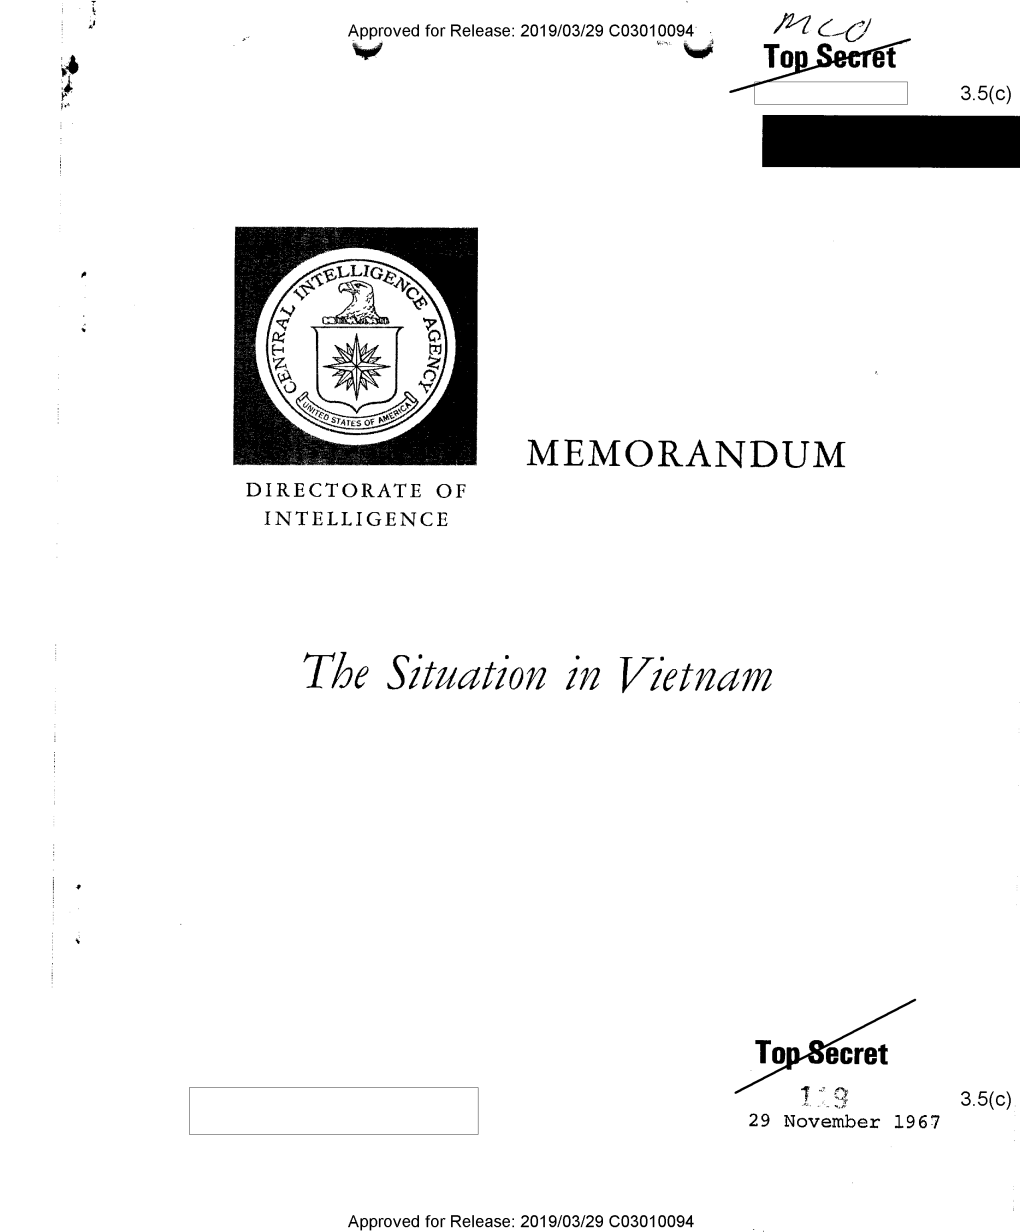 Report on the Situation in Vietnam, 29 November 1967